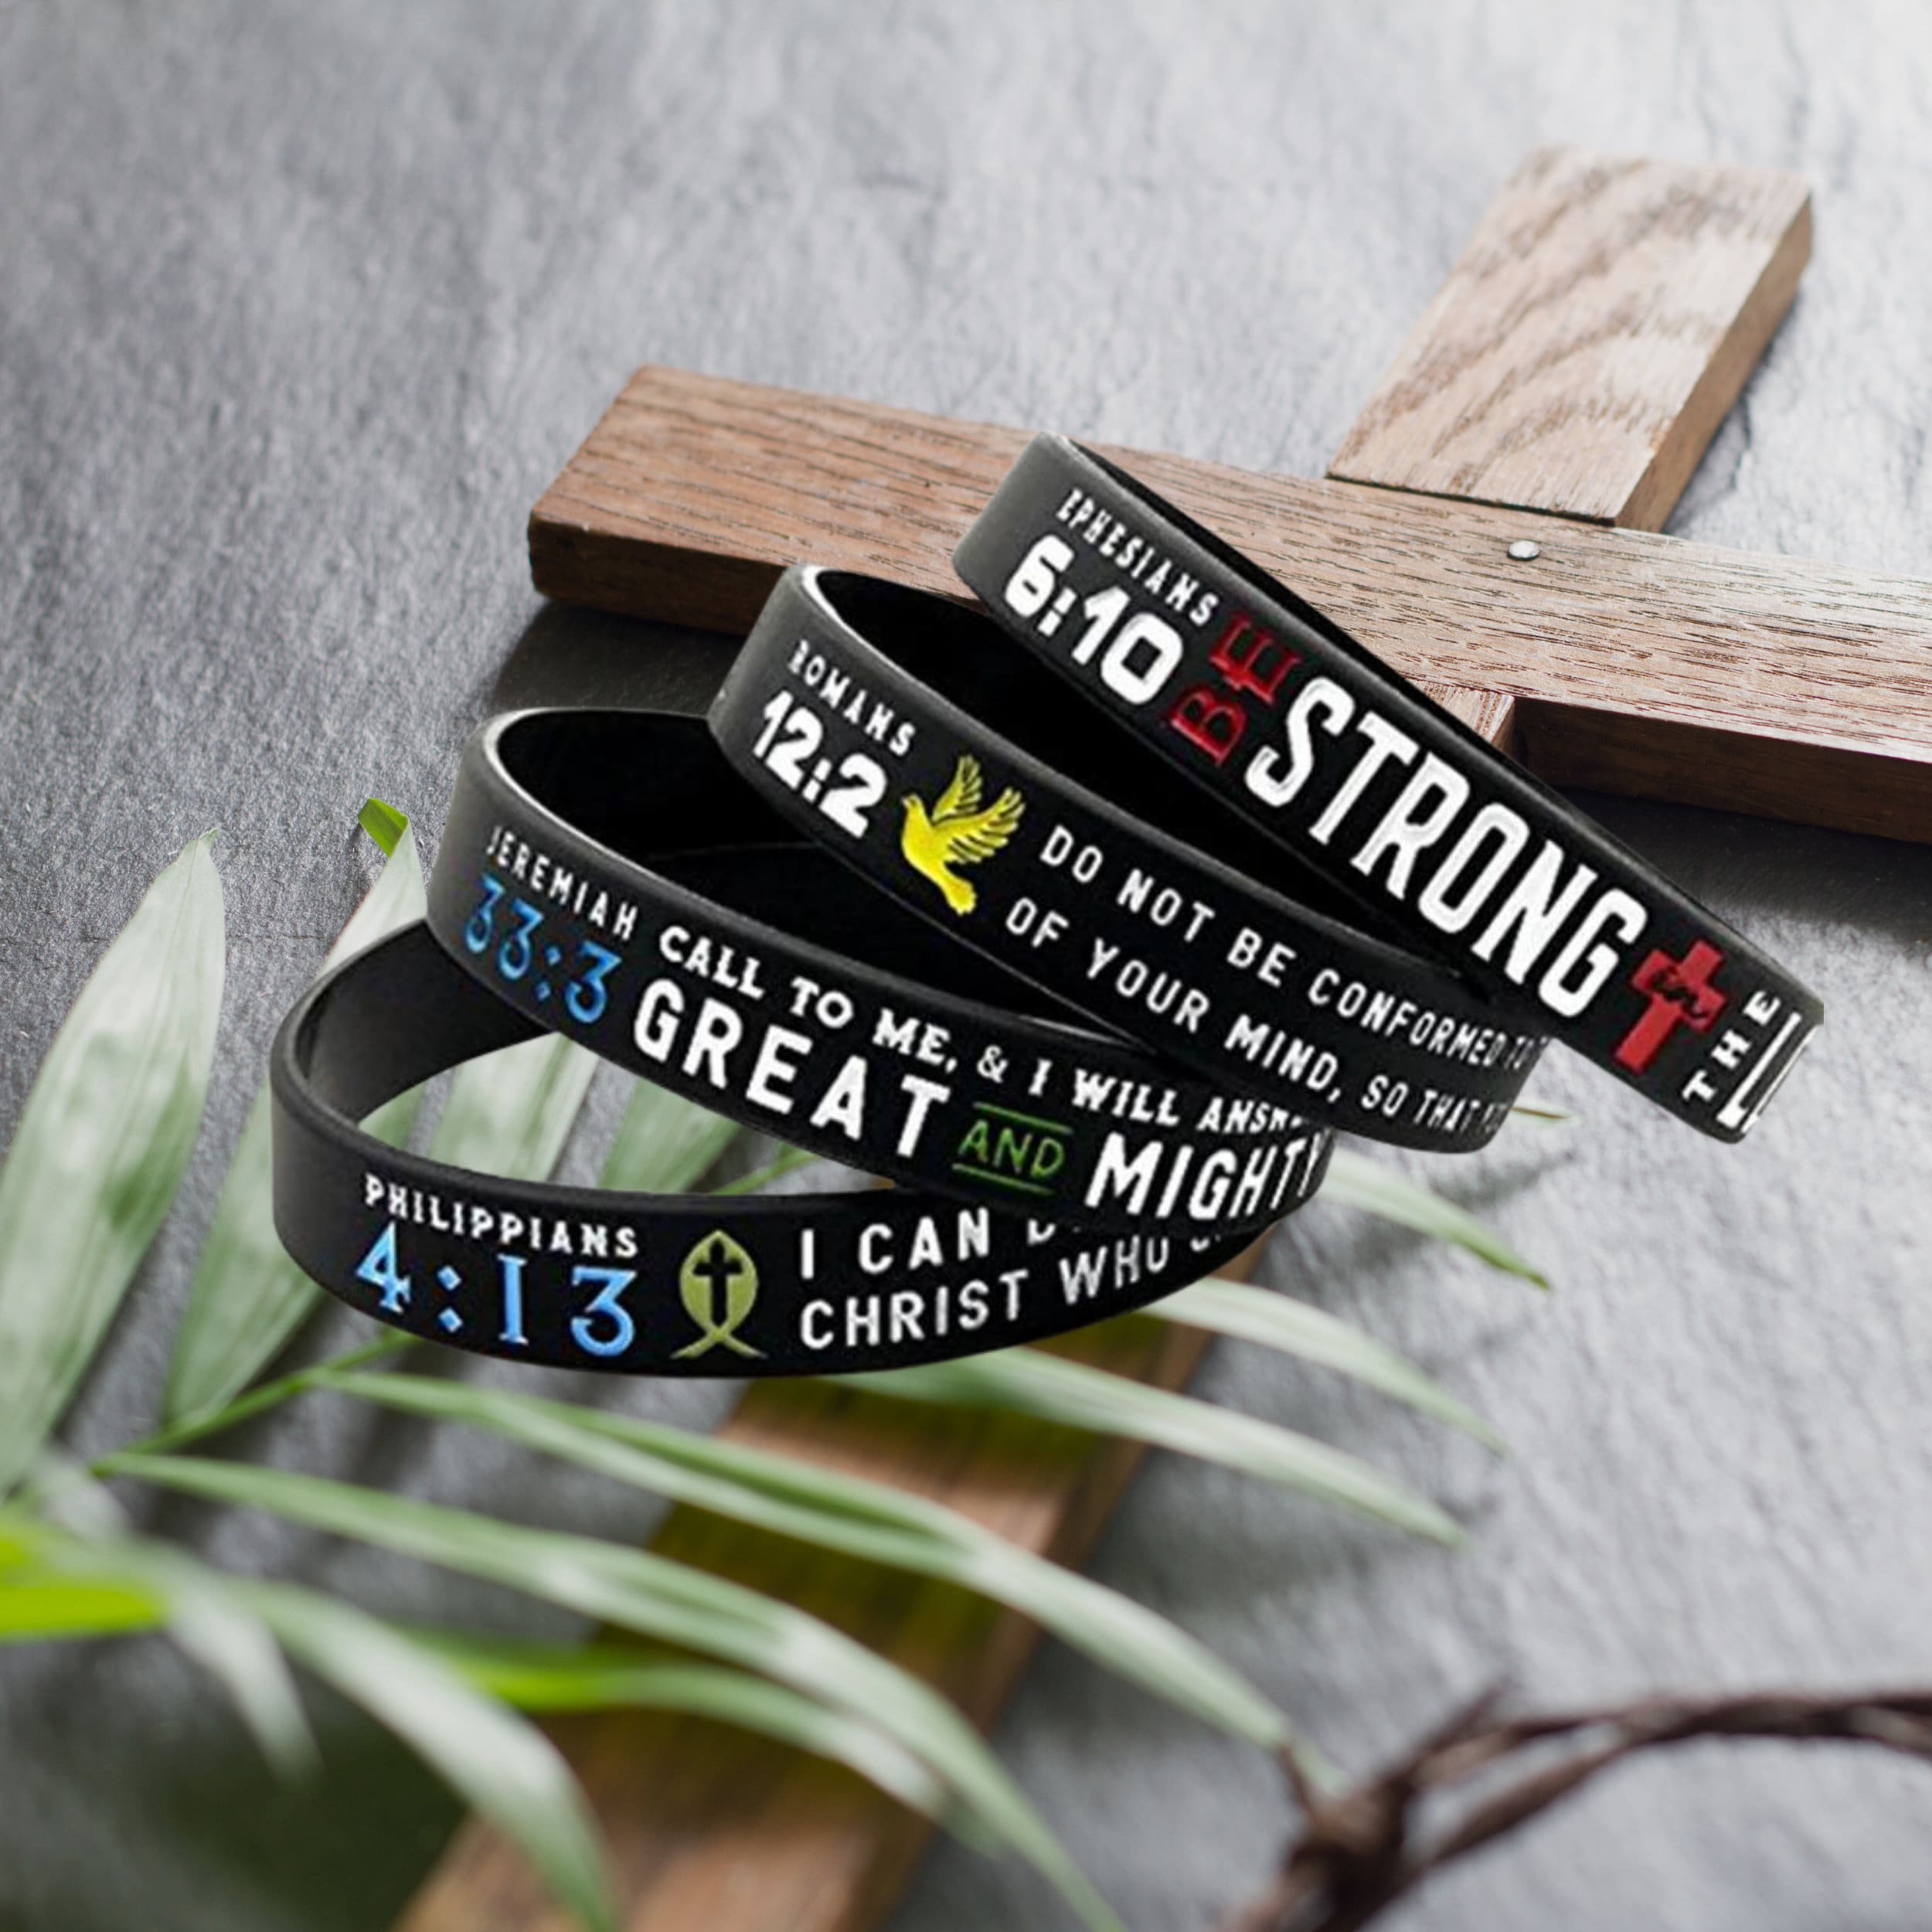 Buy Christian Wristbands Online In India - Etsy India